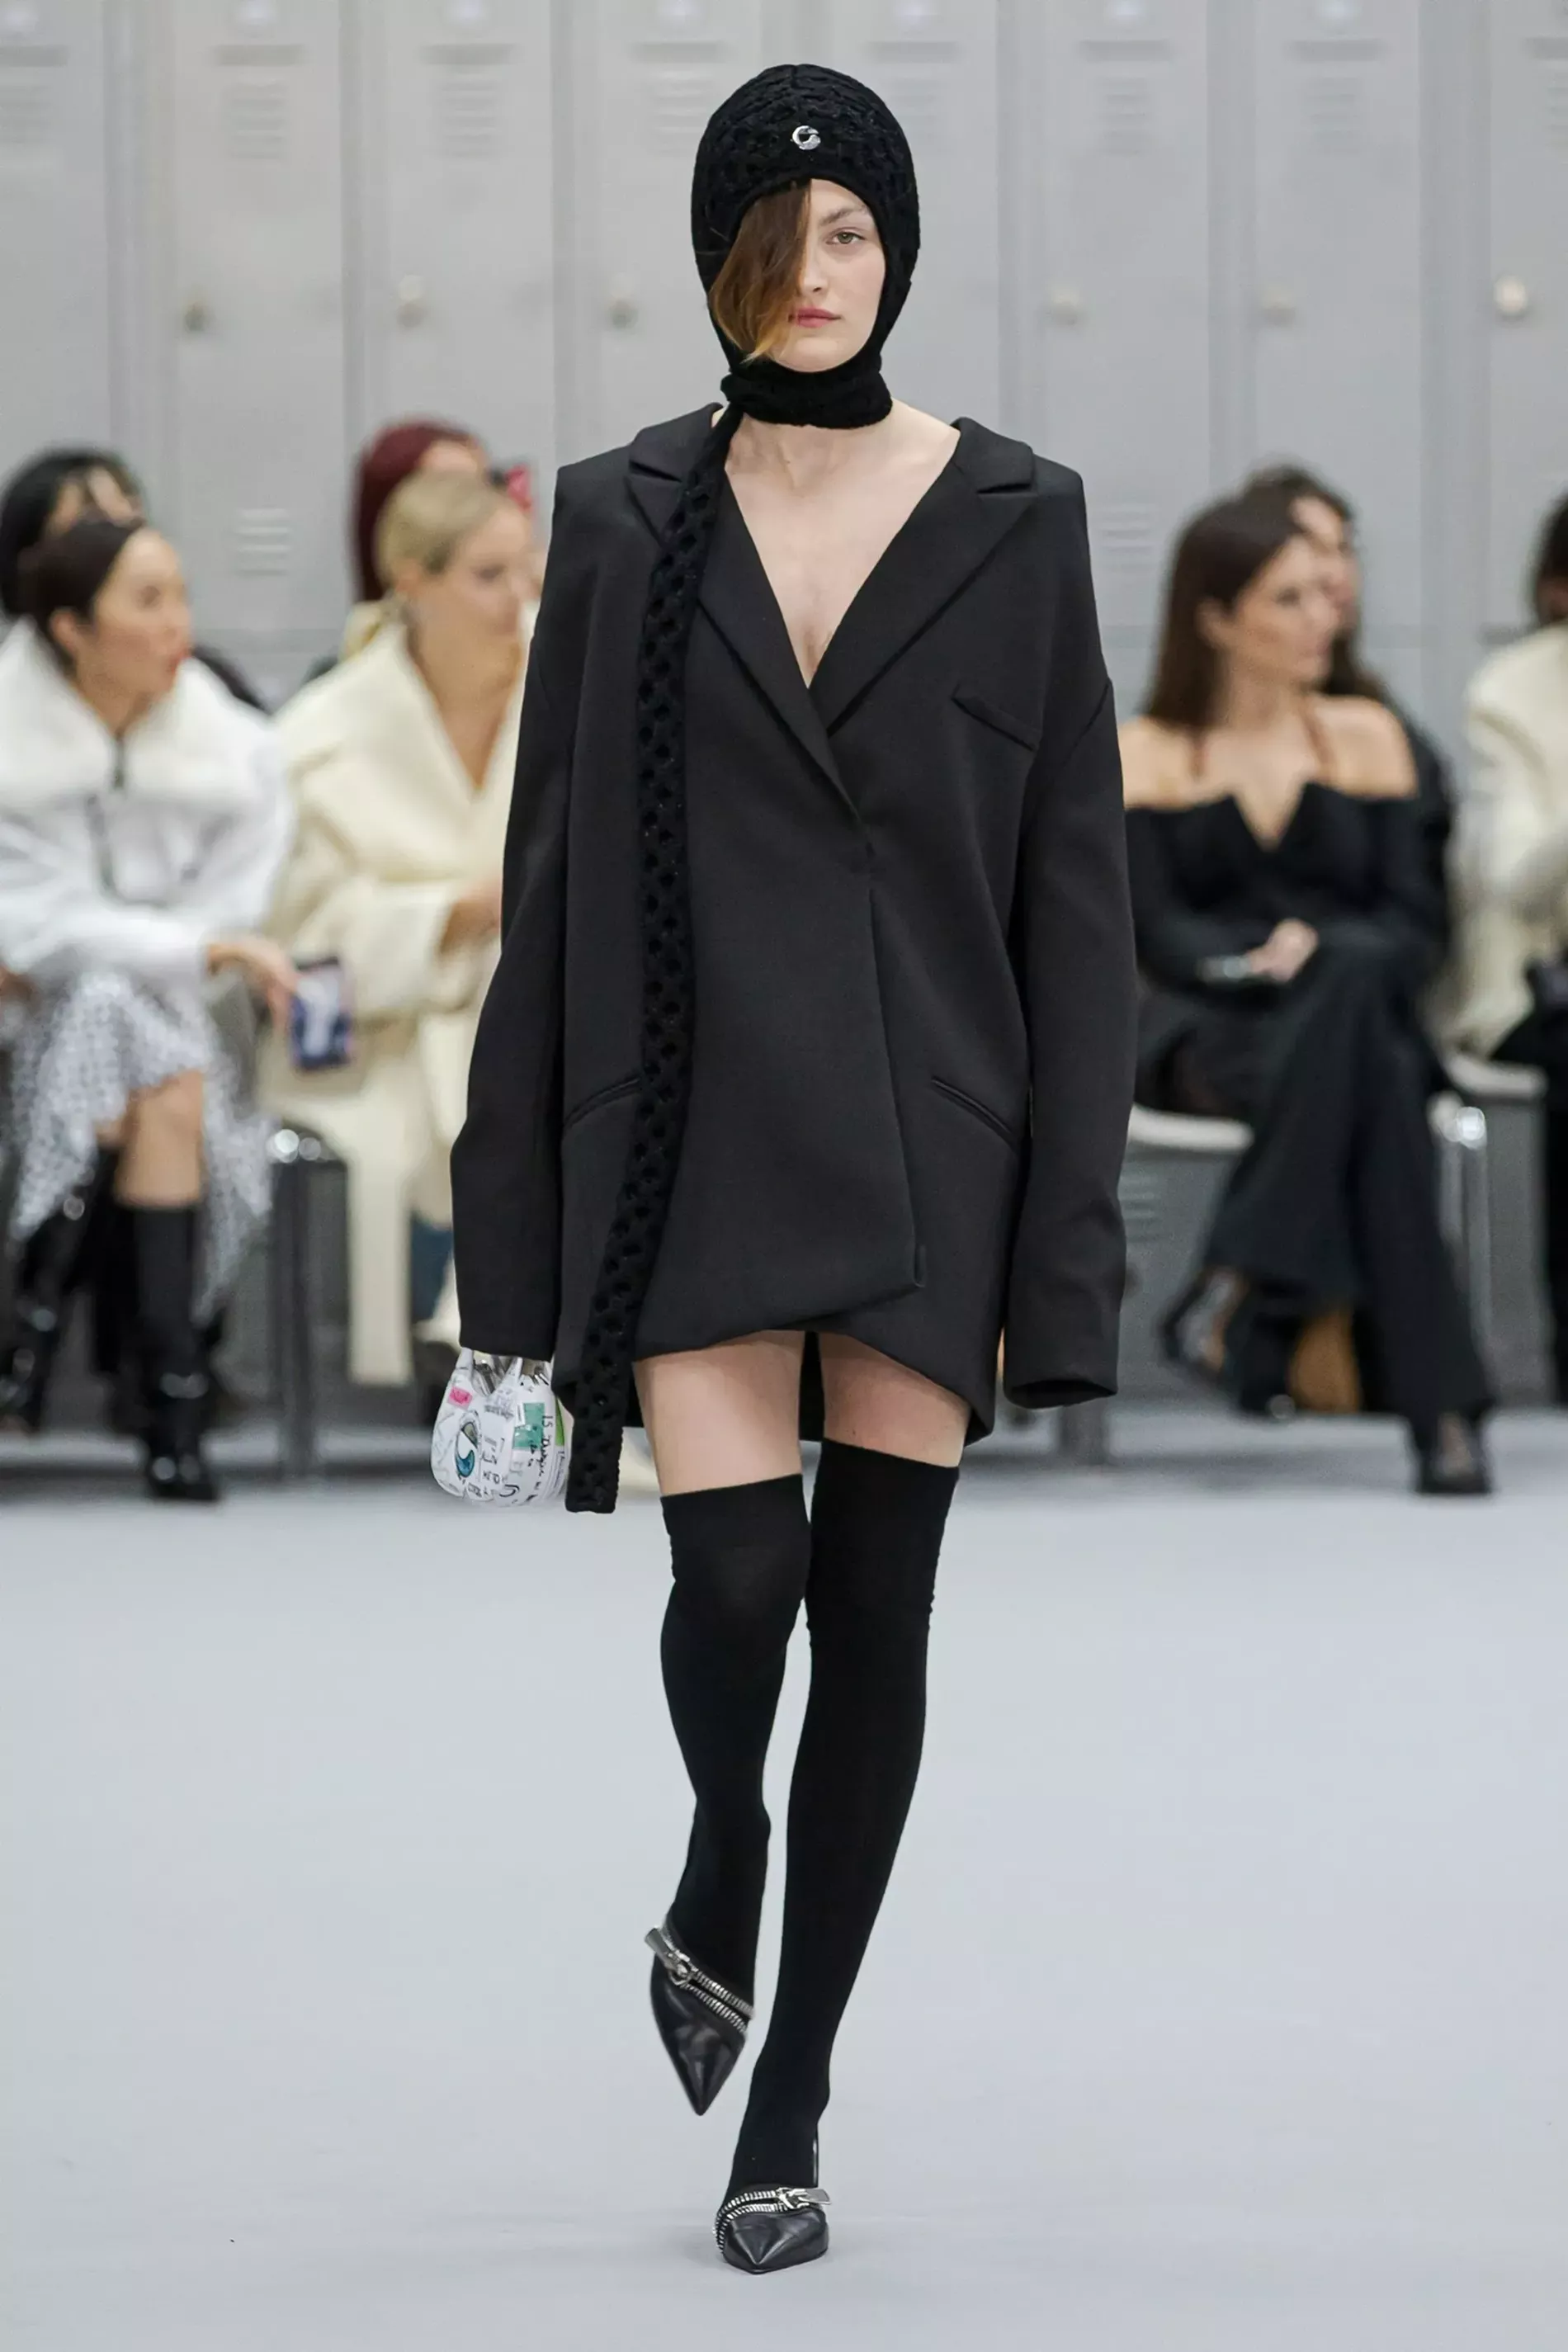 How the balaclava stormed the AW22 catwalk